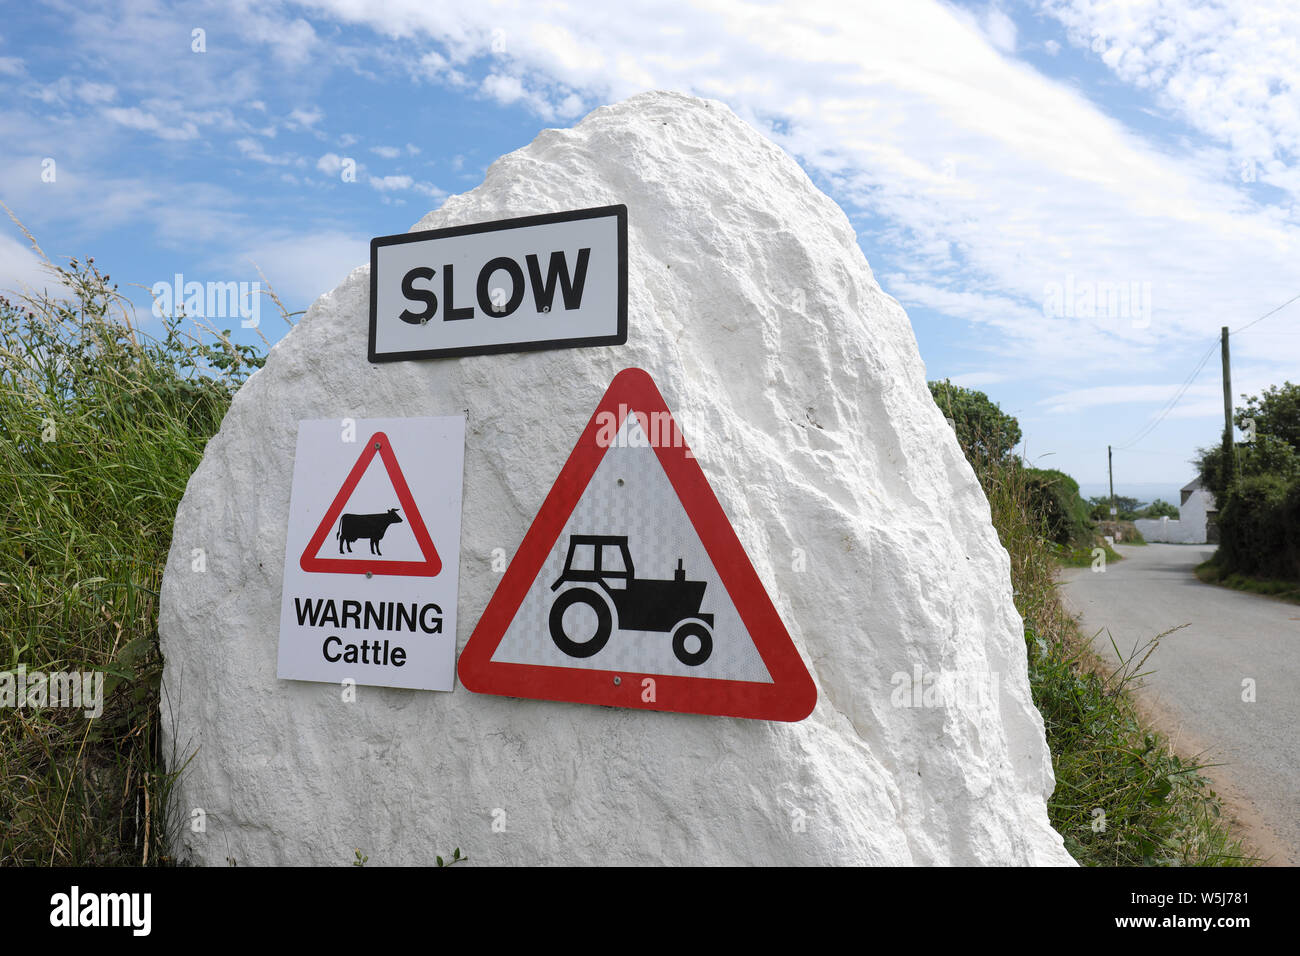 Entrance to farm in Pembrokeshire displaying warning signs for cattle, tractors and speed Stock Photo